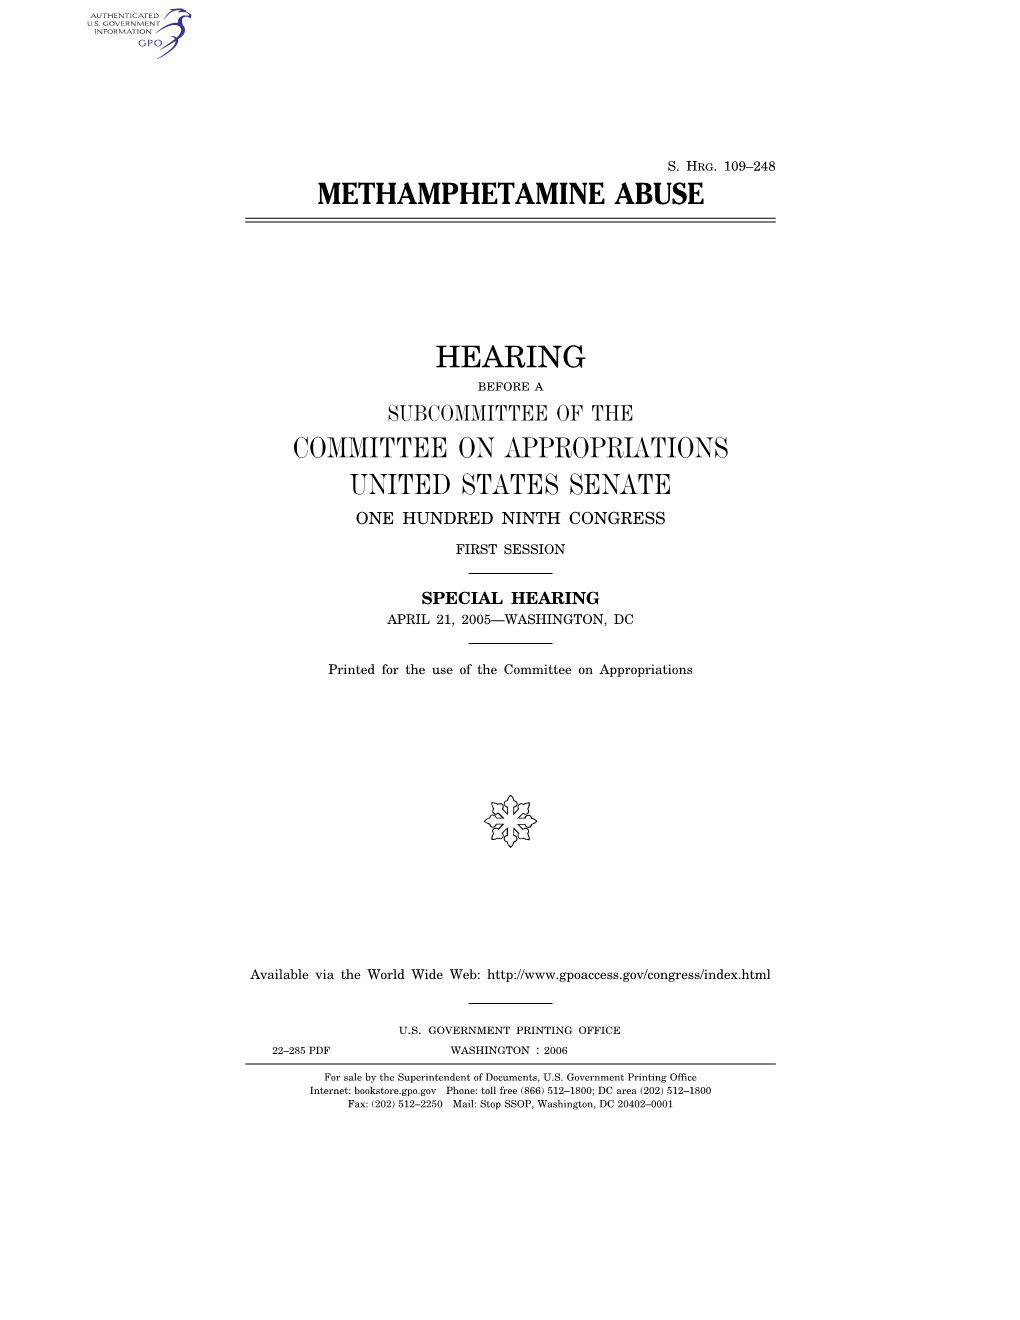 Methamphetamine Abuse Hearing Committee on Appropriations United States Senate